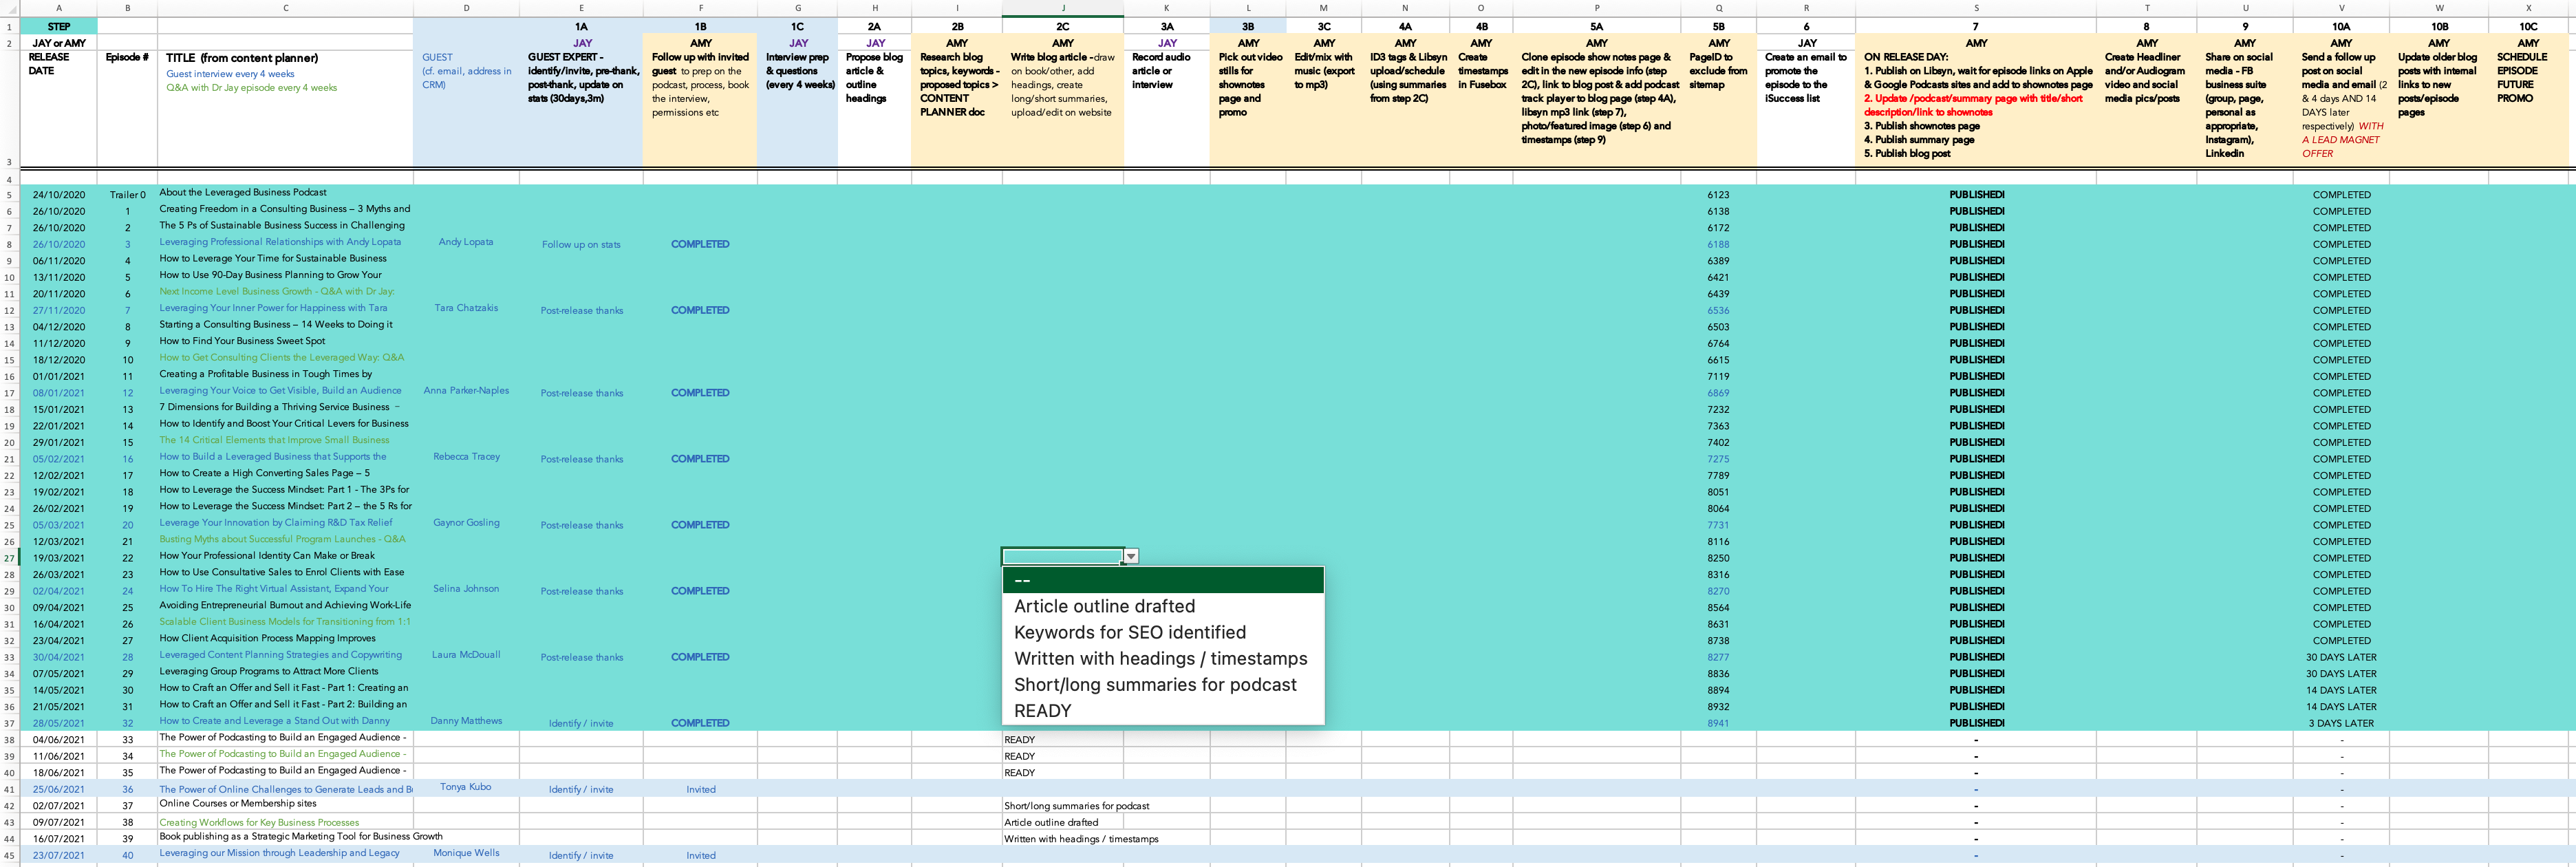 podcast production planning workflow spreadsheet screenshot